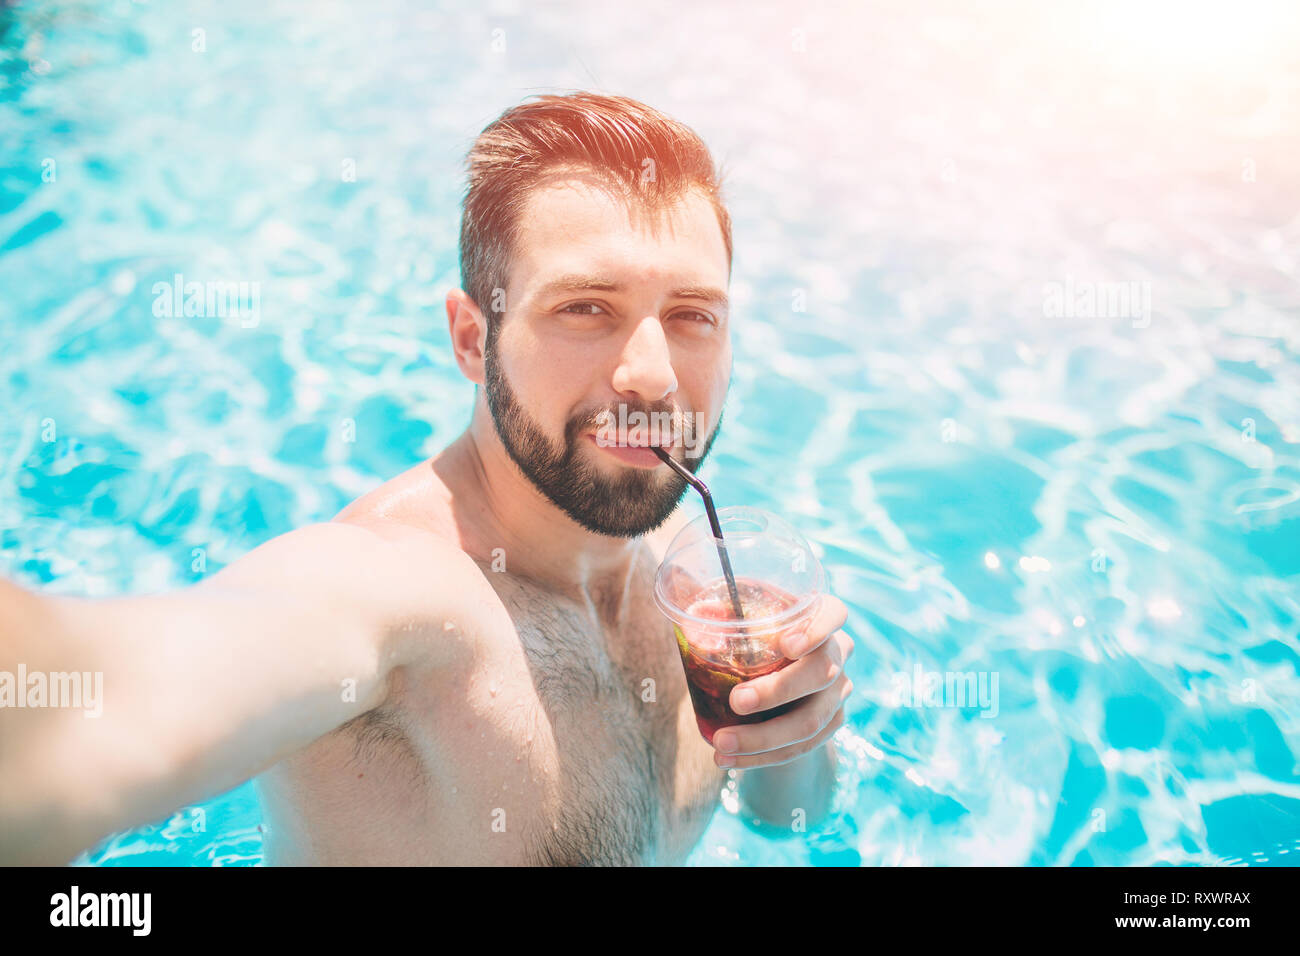 https://c8.alamy.com/comp/RXWRAX/happy-bearded-man-making-selfie-in-swimming-pool-he-is-drinking-a-cocktail-and-relaxing-RXWRAX.jpg